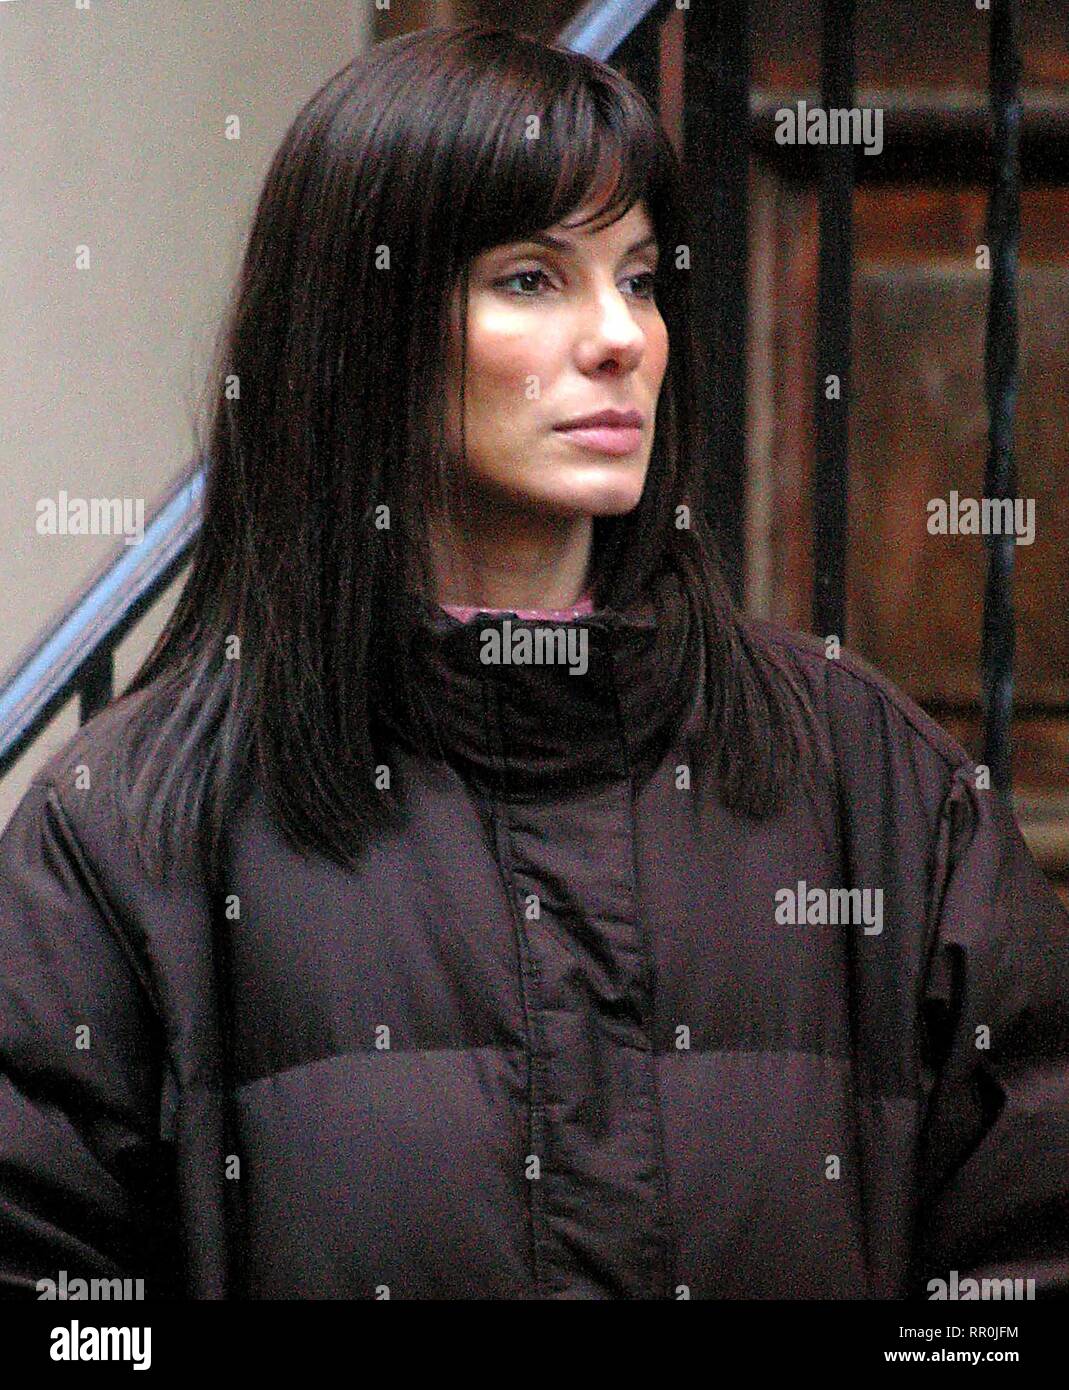 Sandra Bullock on the Set of New Film 'Two Week Notice' on 83st Between 1st and 2nd Ave in New York City Photo by: John Barrett/PhotoLink /MediaPunch Stock Photo